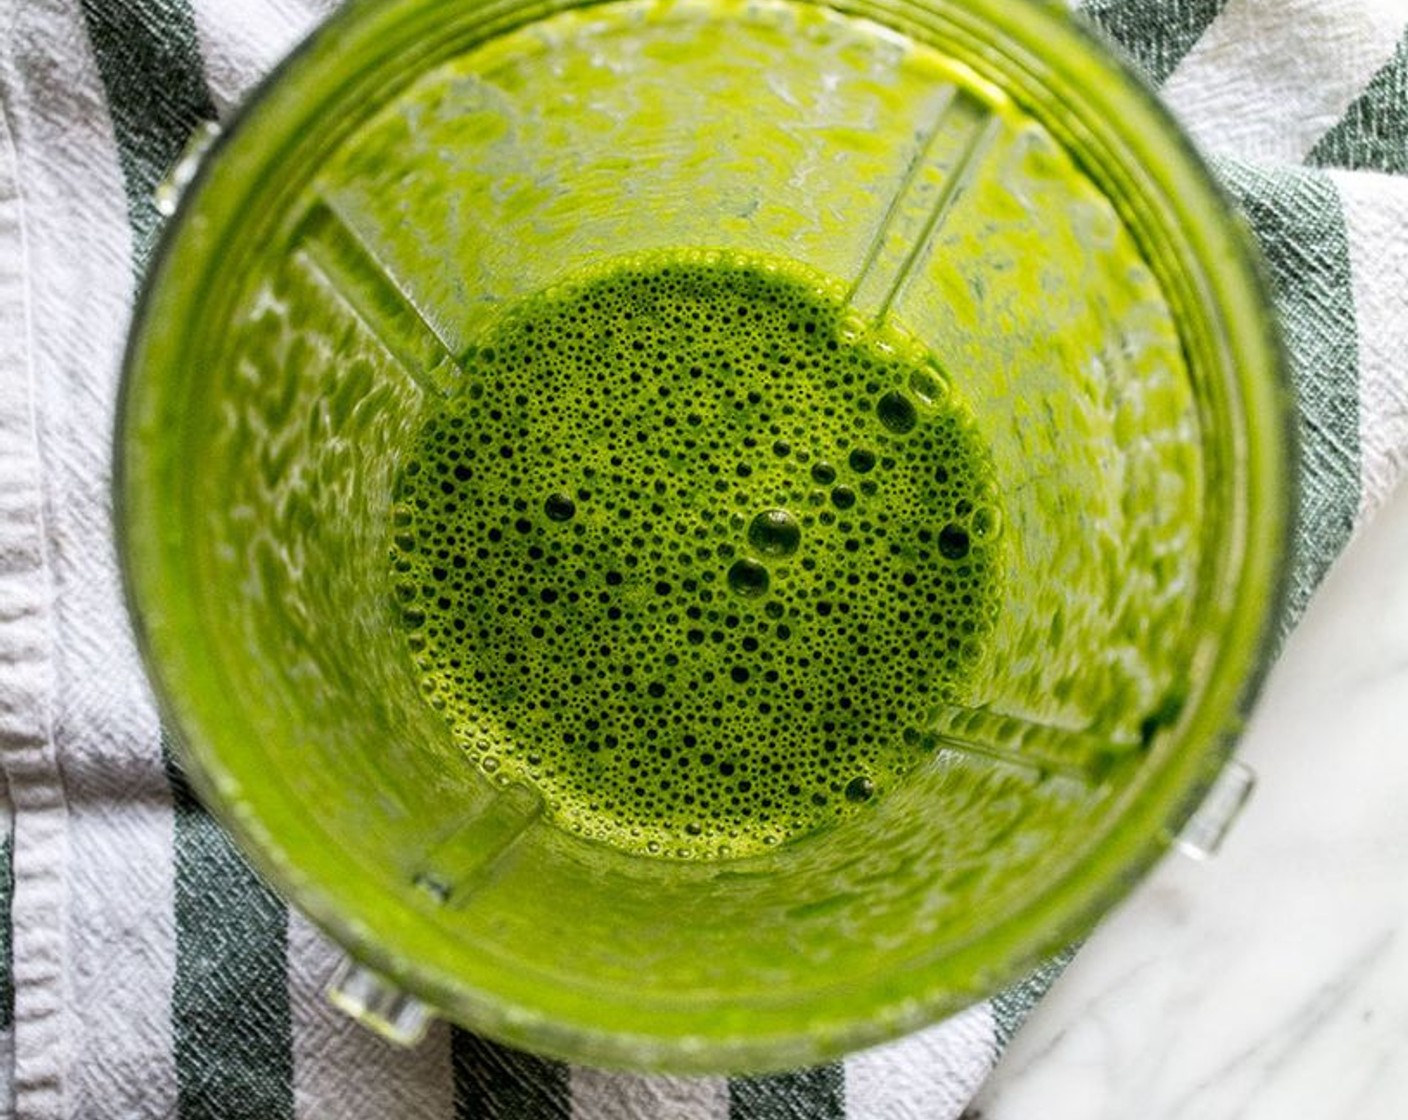 step 2 Add Unsweetened Vanilla Almond Milk (1/2 cup), Fresh Baby Spinach (2 cups), Pea Protein Powder (2 scoops), Peanut Butter Protein Powder (2 cups), and Honey (1/3 cup) to a high-speed blender and blend until smooth with no traces of the spinach leaves - approximate 20-30 seconds.